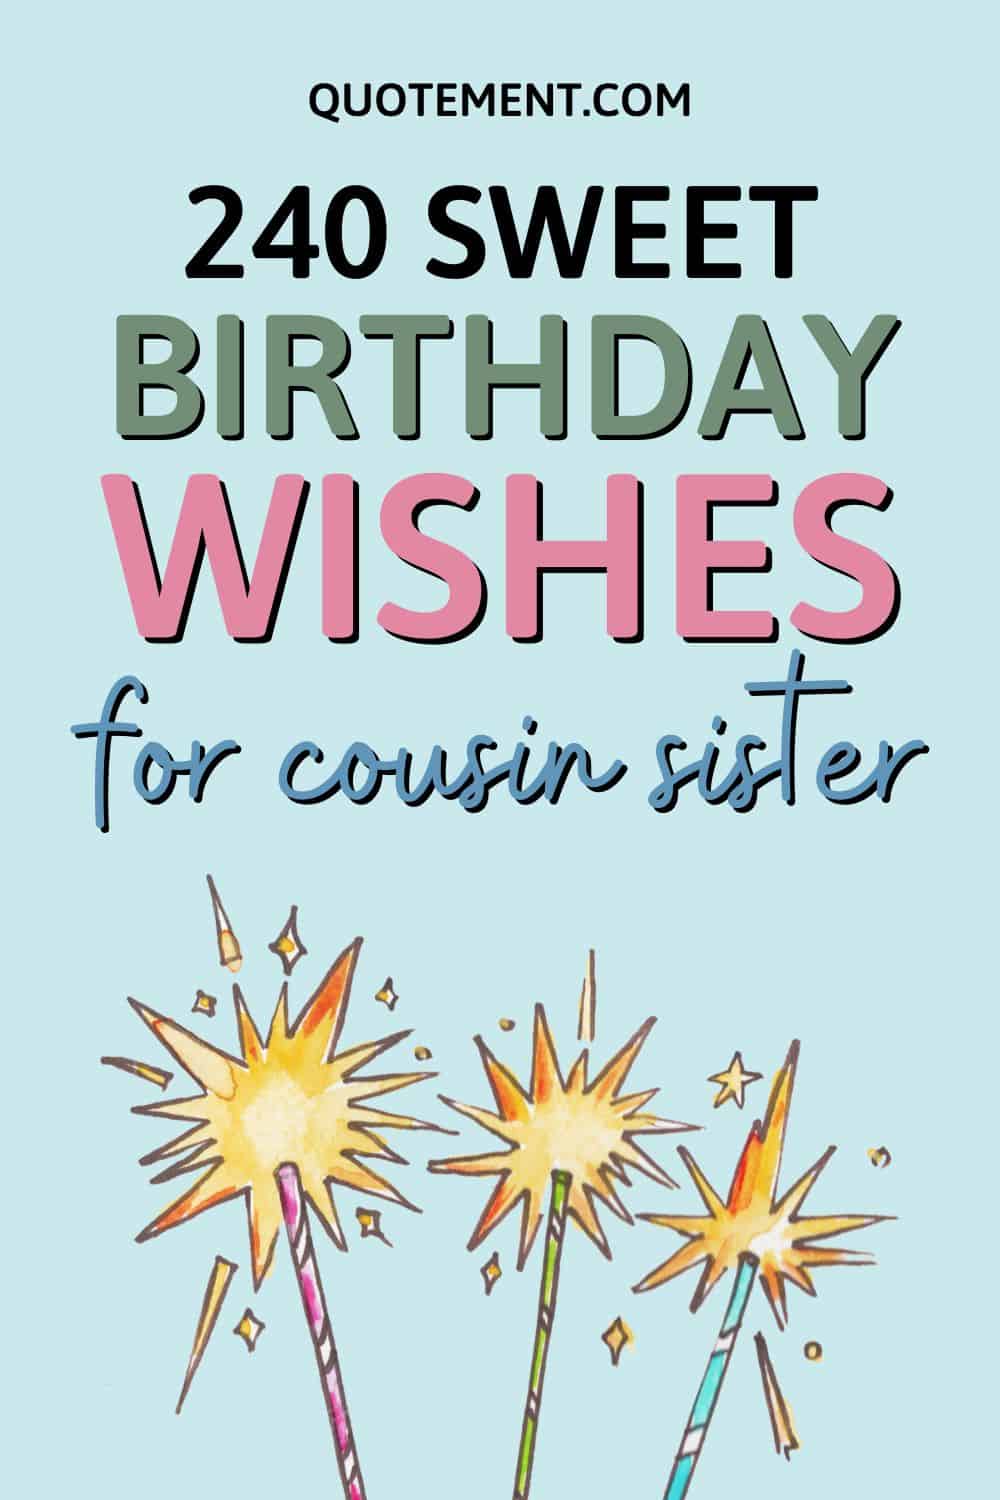 240 Sweet Birthday Wishes For Cousin Sister To Make Her Day 